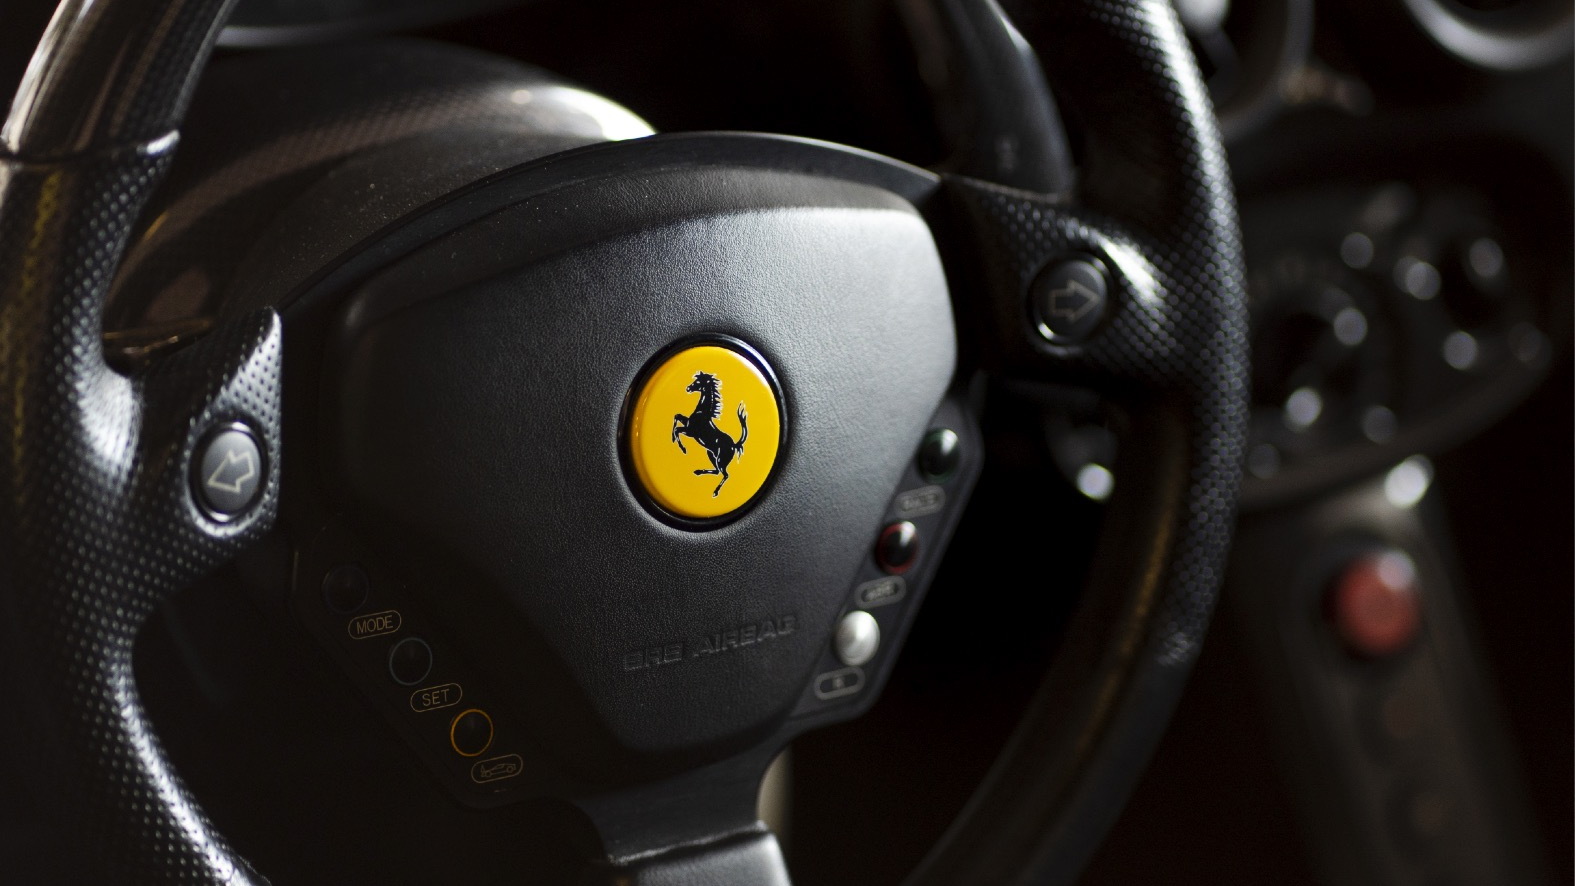 Ferrari Enzo once owned by Fernando Alonso - Photo credit: Monaco Car Auctions